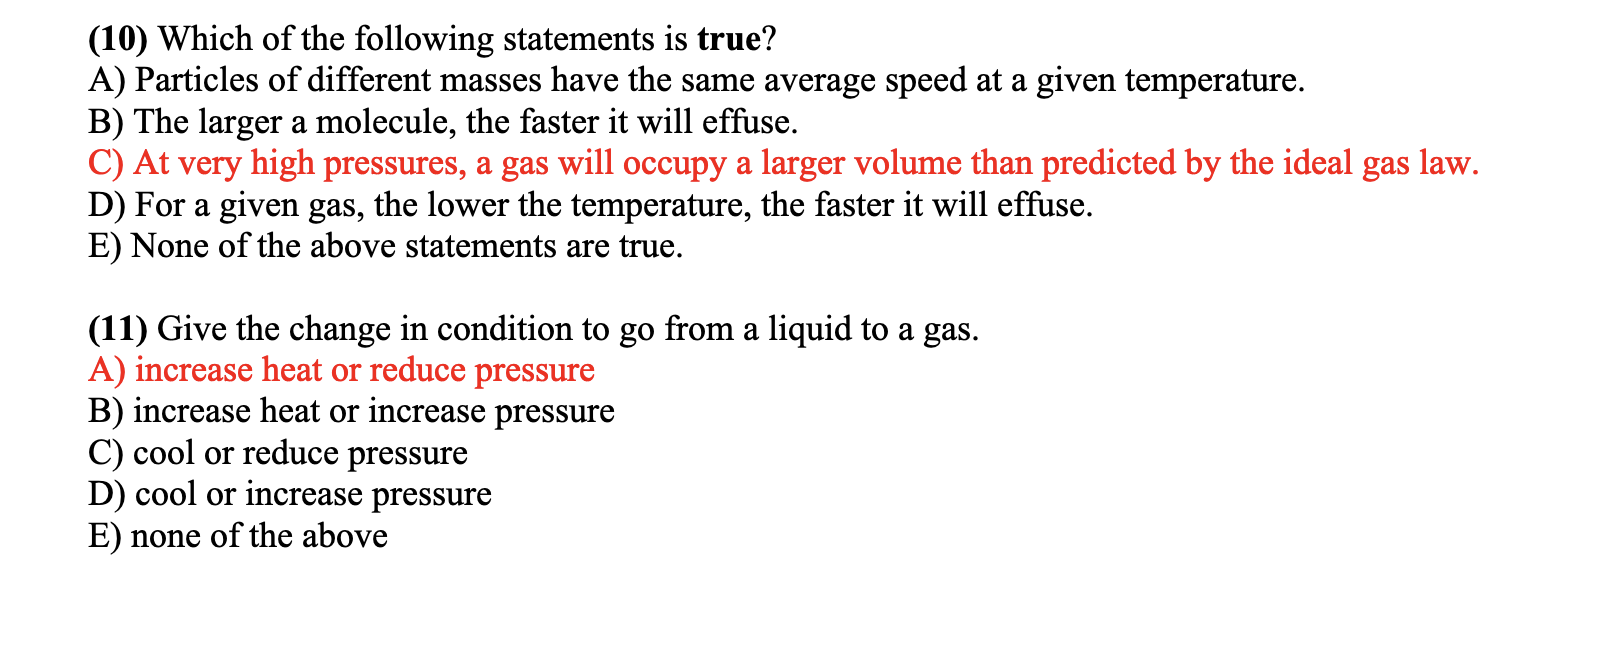 (10) Which of the following statements is true?
A) Particles of different masses have the same average speed at a given temperature.
B) The larger a molecule, the faster it will effuse.
C) At very high pressures, a gas will occupy a larger volume than predicted by the ideal gas law.
D) For a given gas, the lower the temperature, the faster it will effuse.
E) None of the above statements are true.
(11) Give the change in condition to go from a liquid to a gas.
A) increase heat or reduce pressure
B) increase heat or increase pressure
C) cool or reduce pressure
D) cool or increase pressure
E) none of the above
